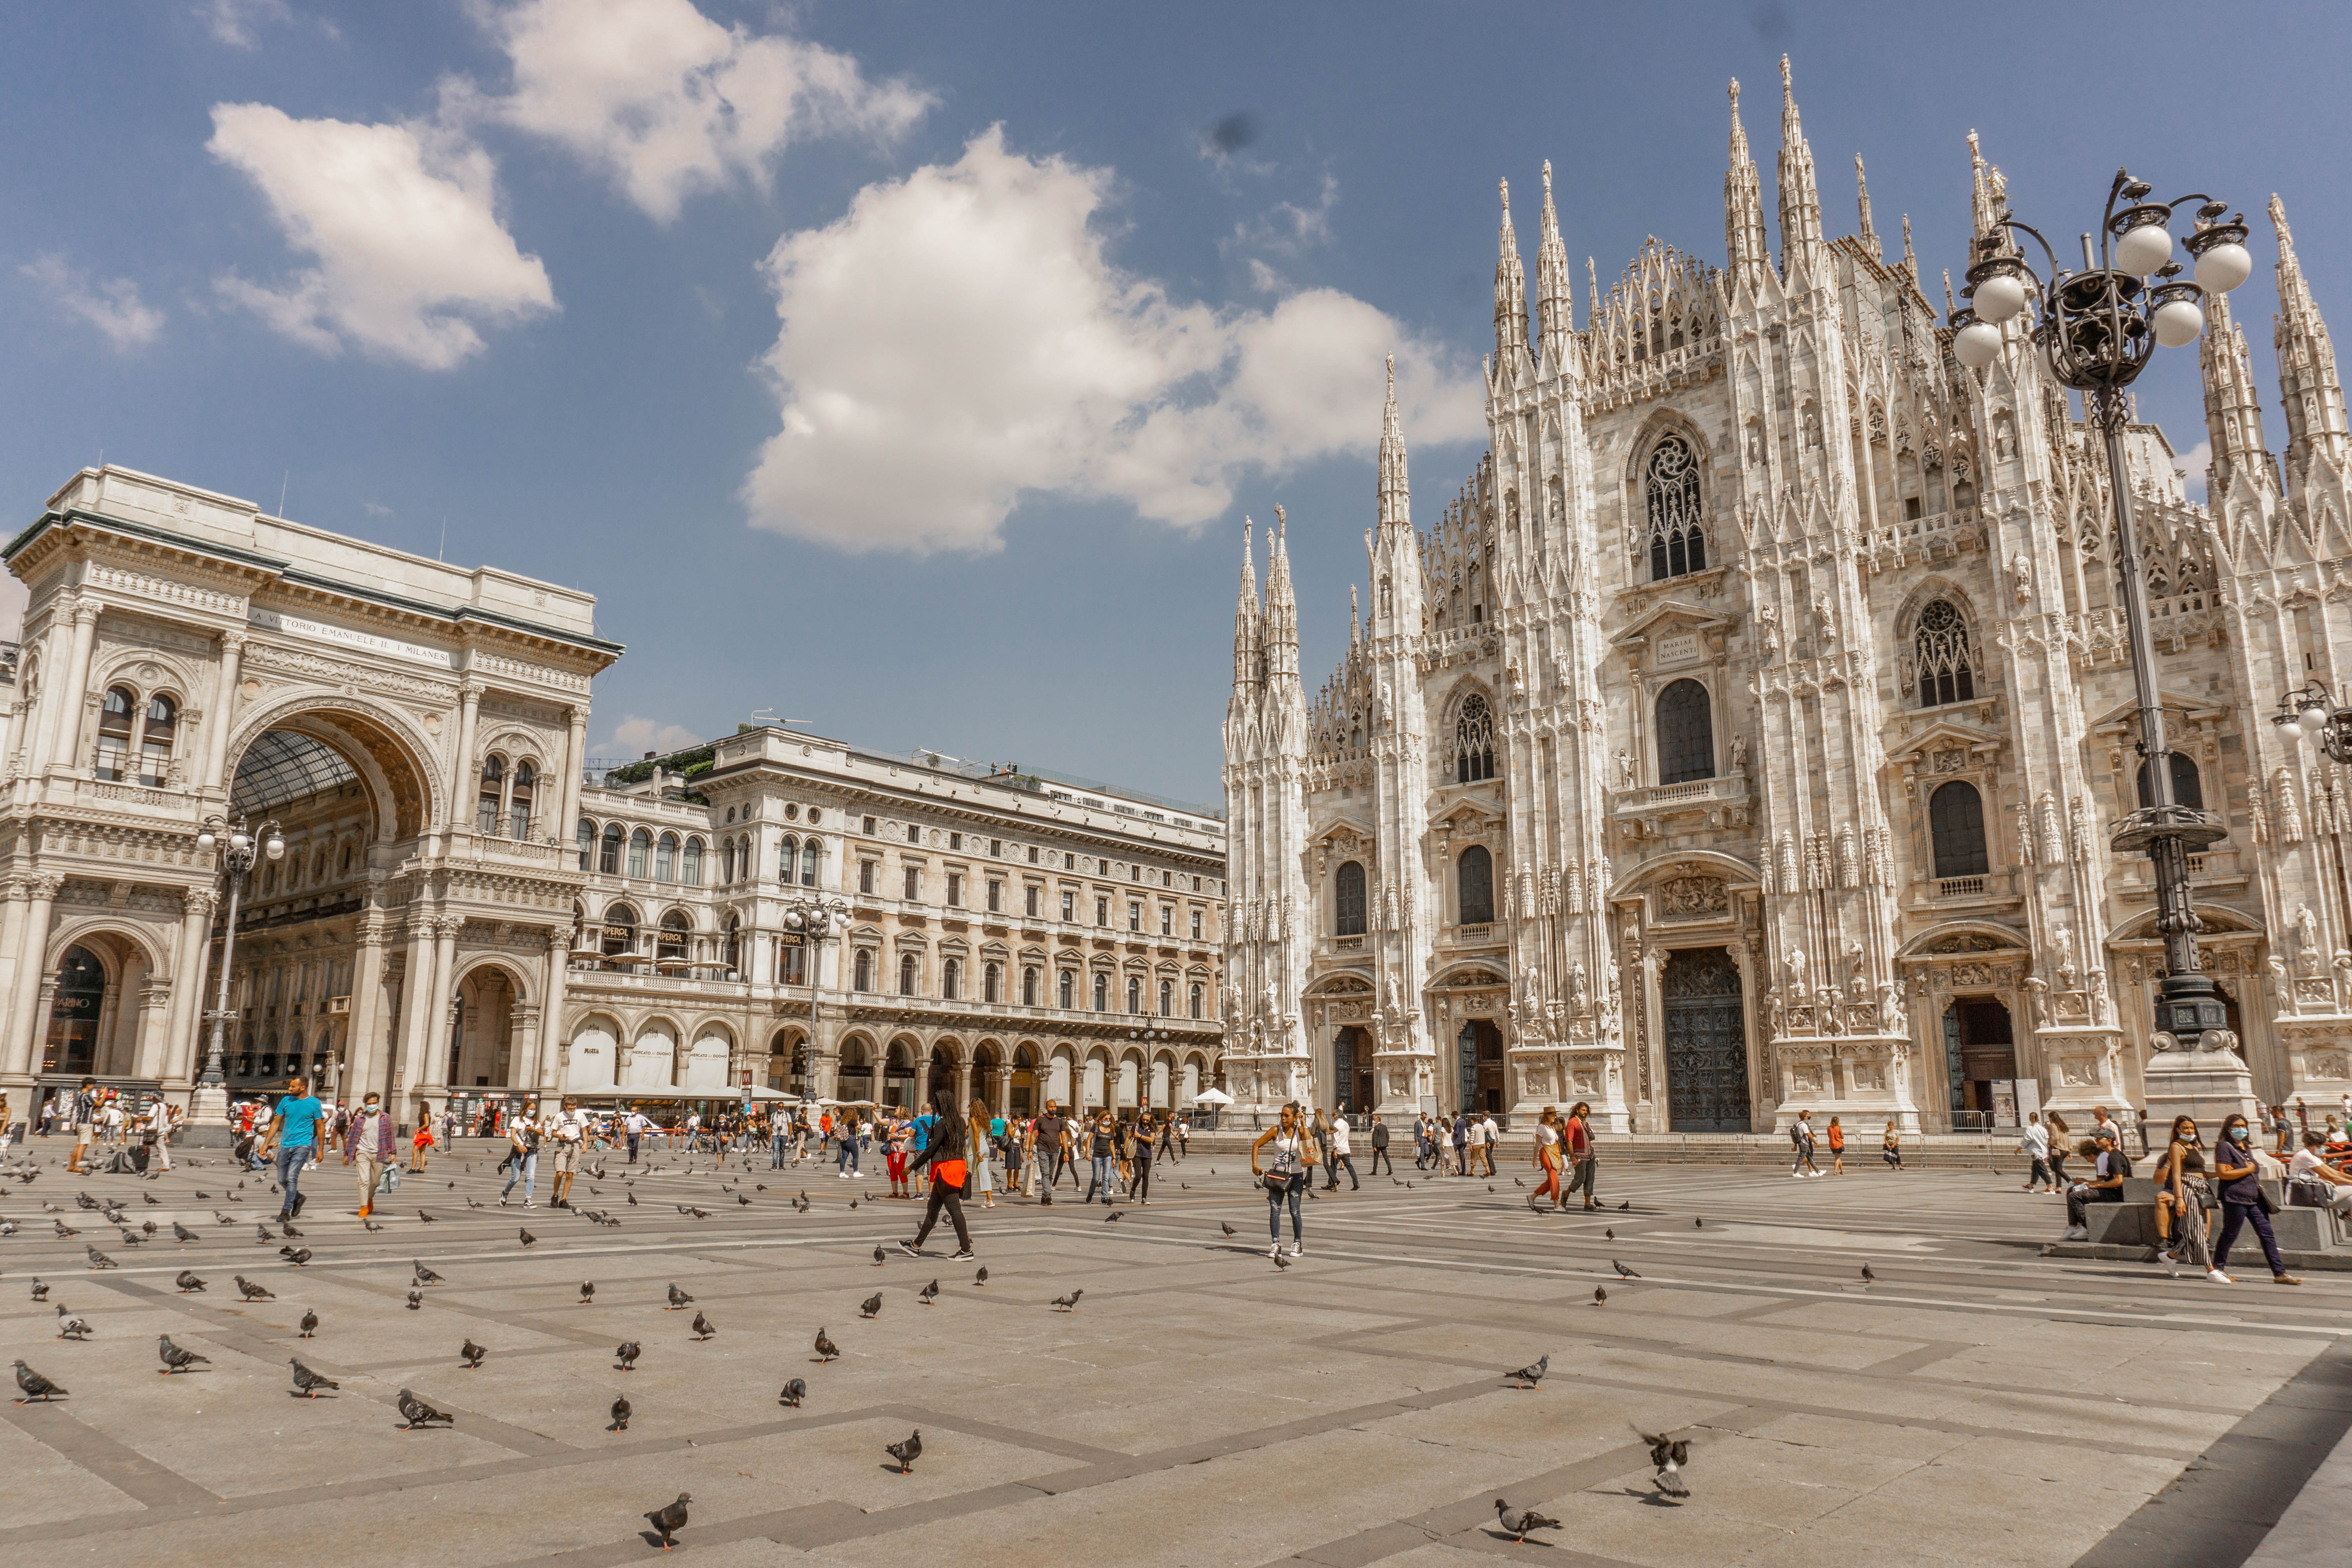 The Piazza del Duomo has a few people and birds scattered throughout the area on a sunny day. The sky is blue with clouds. The Duomo di Milano stands grandly in the right side of the shot.